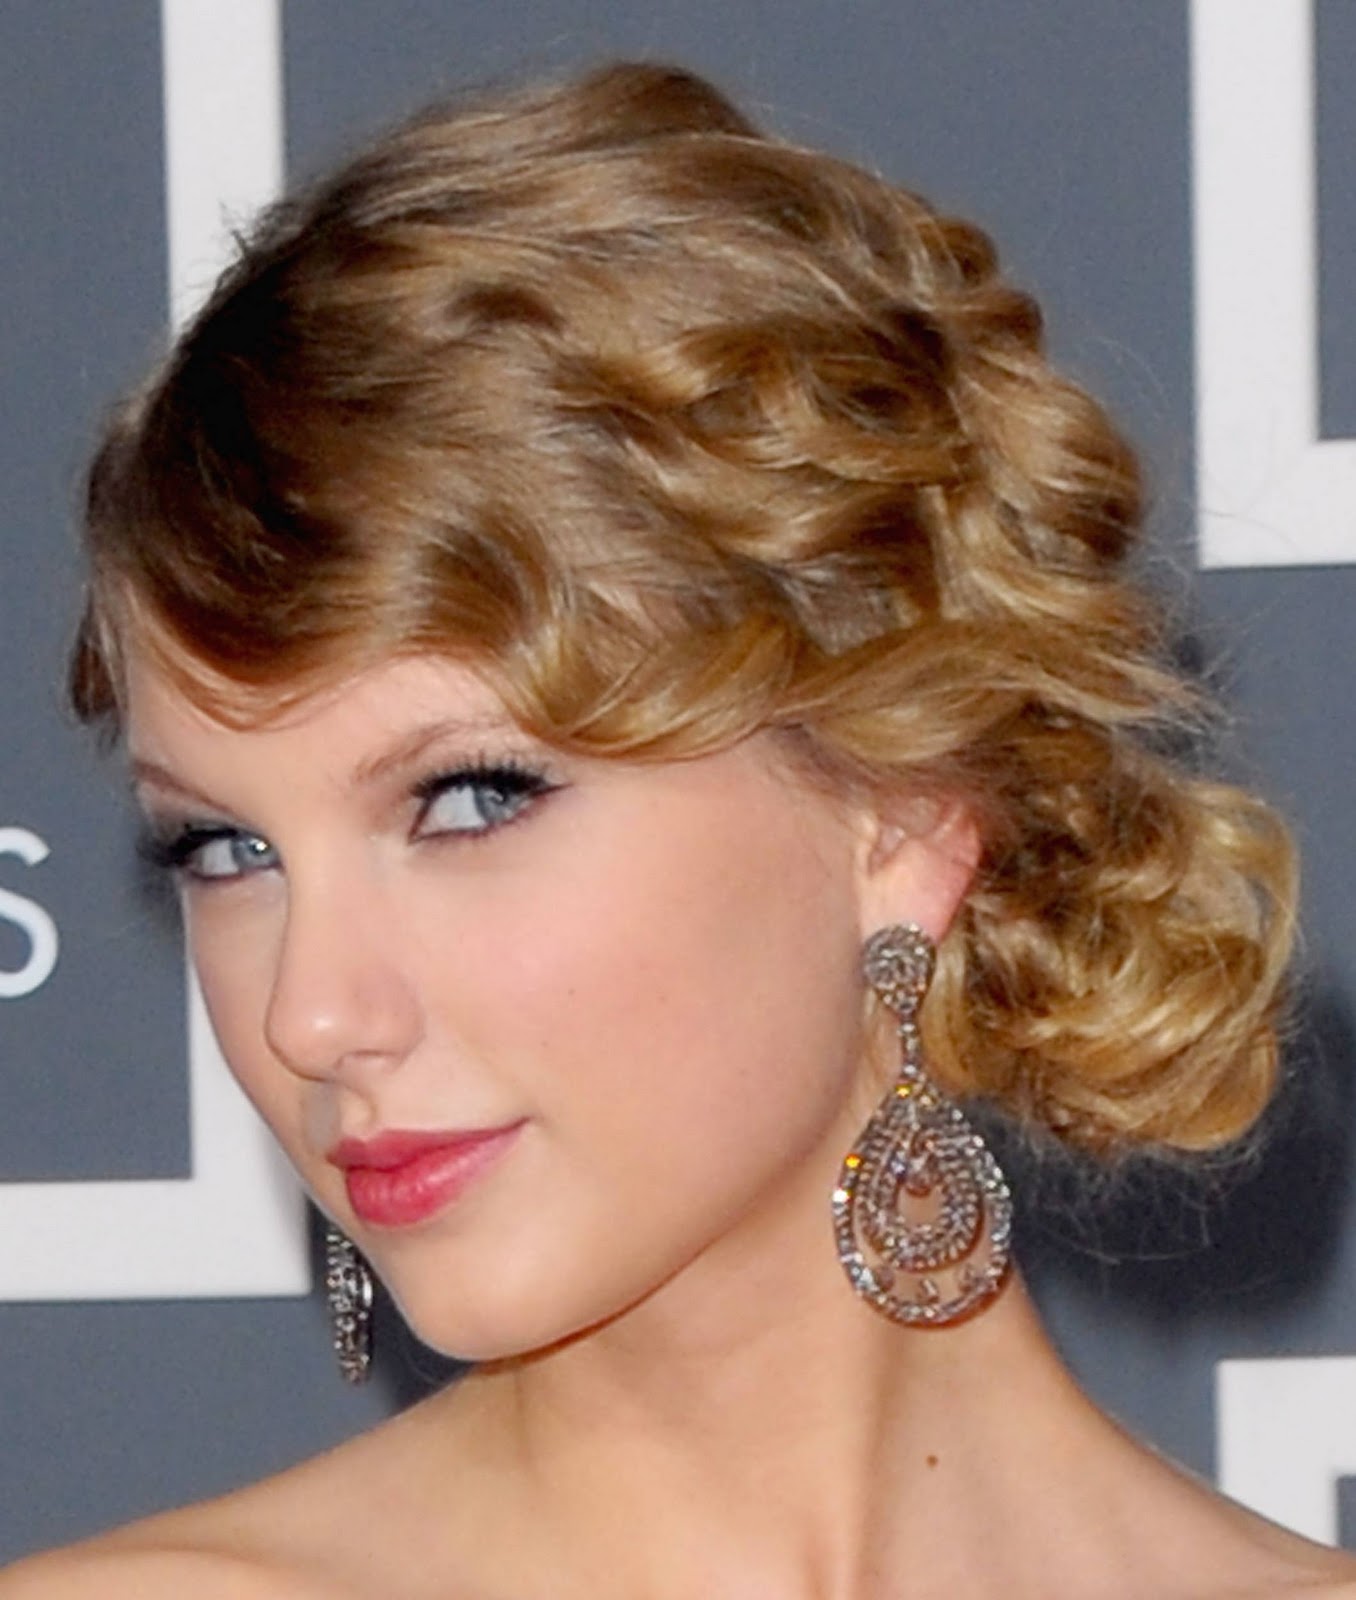 Curly Prom Hairstyles For Long Hair Half Up Taylor Swift Long Hairstyles with bangs 2012, hairspray lyrics 